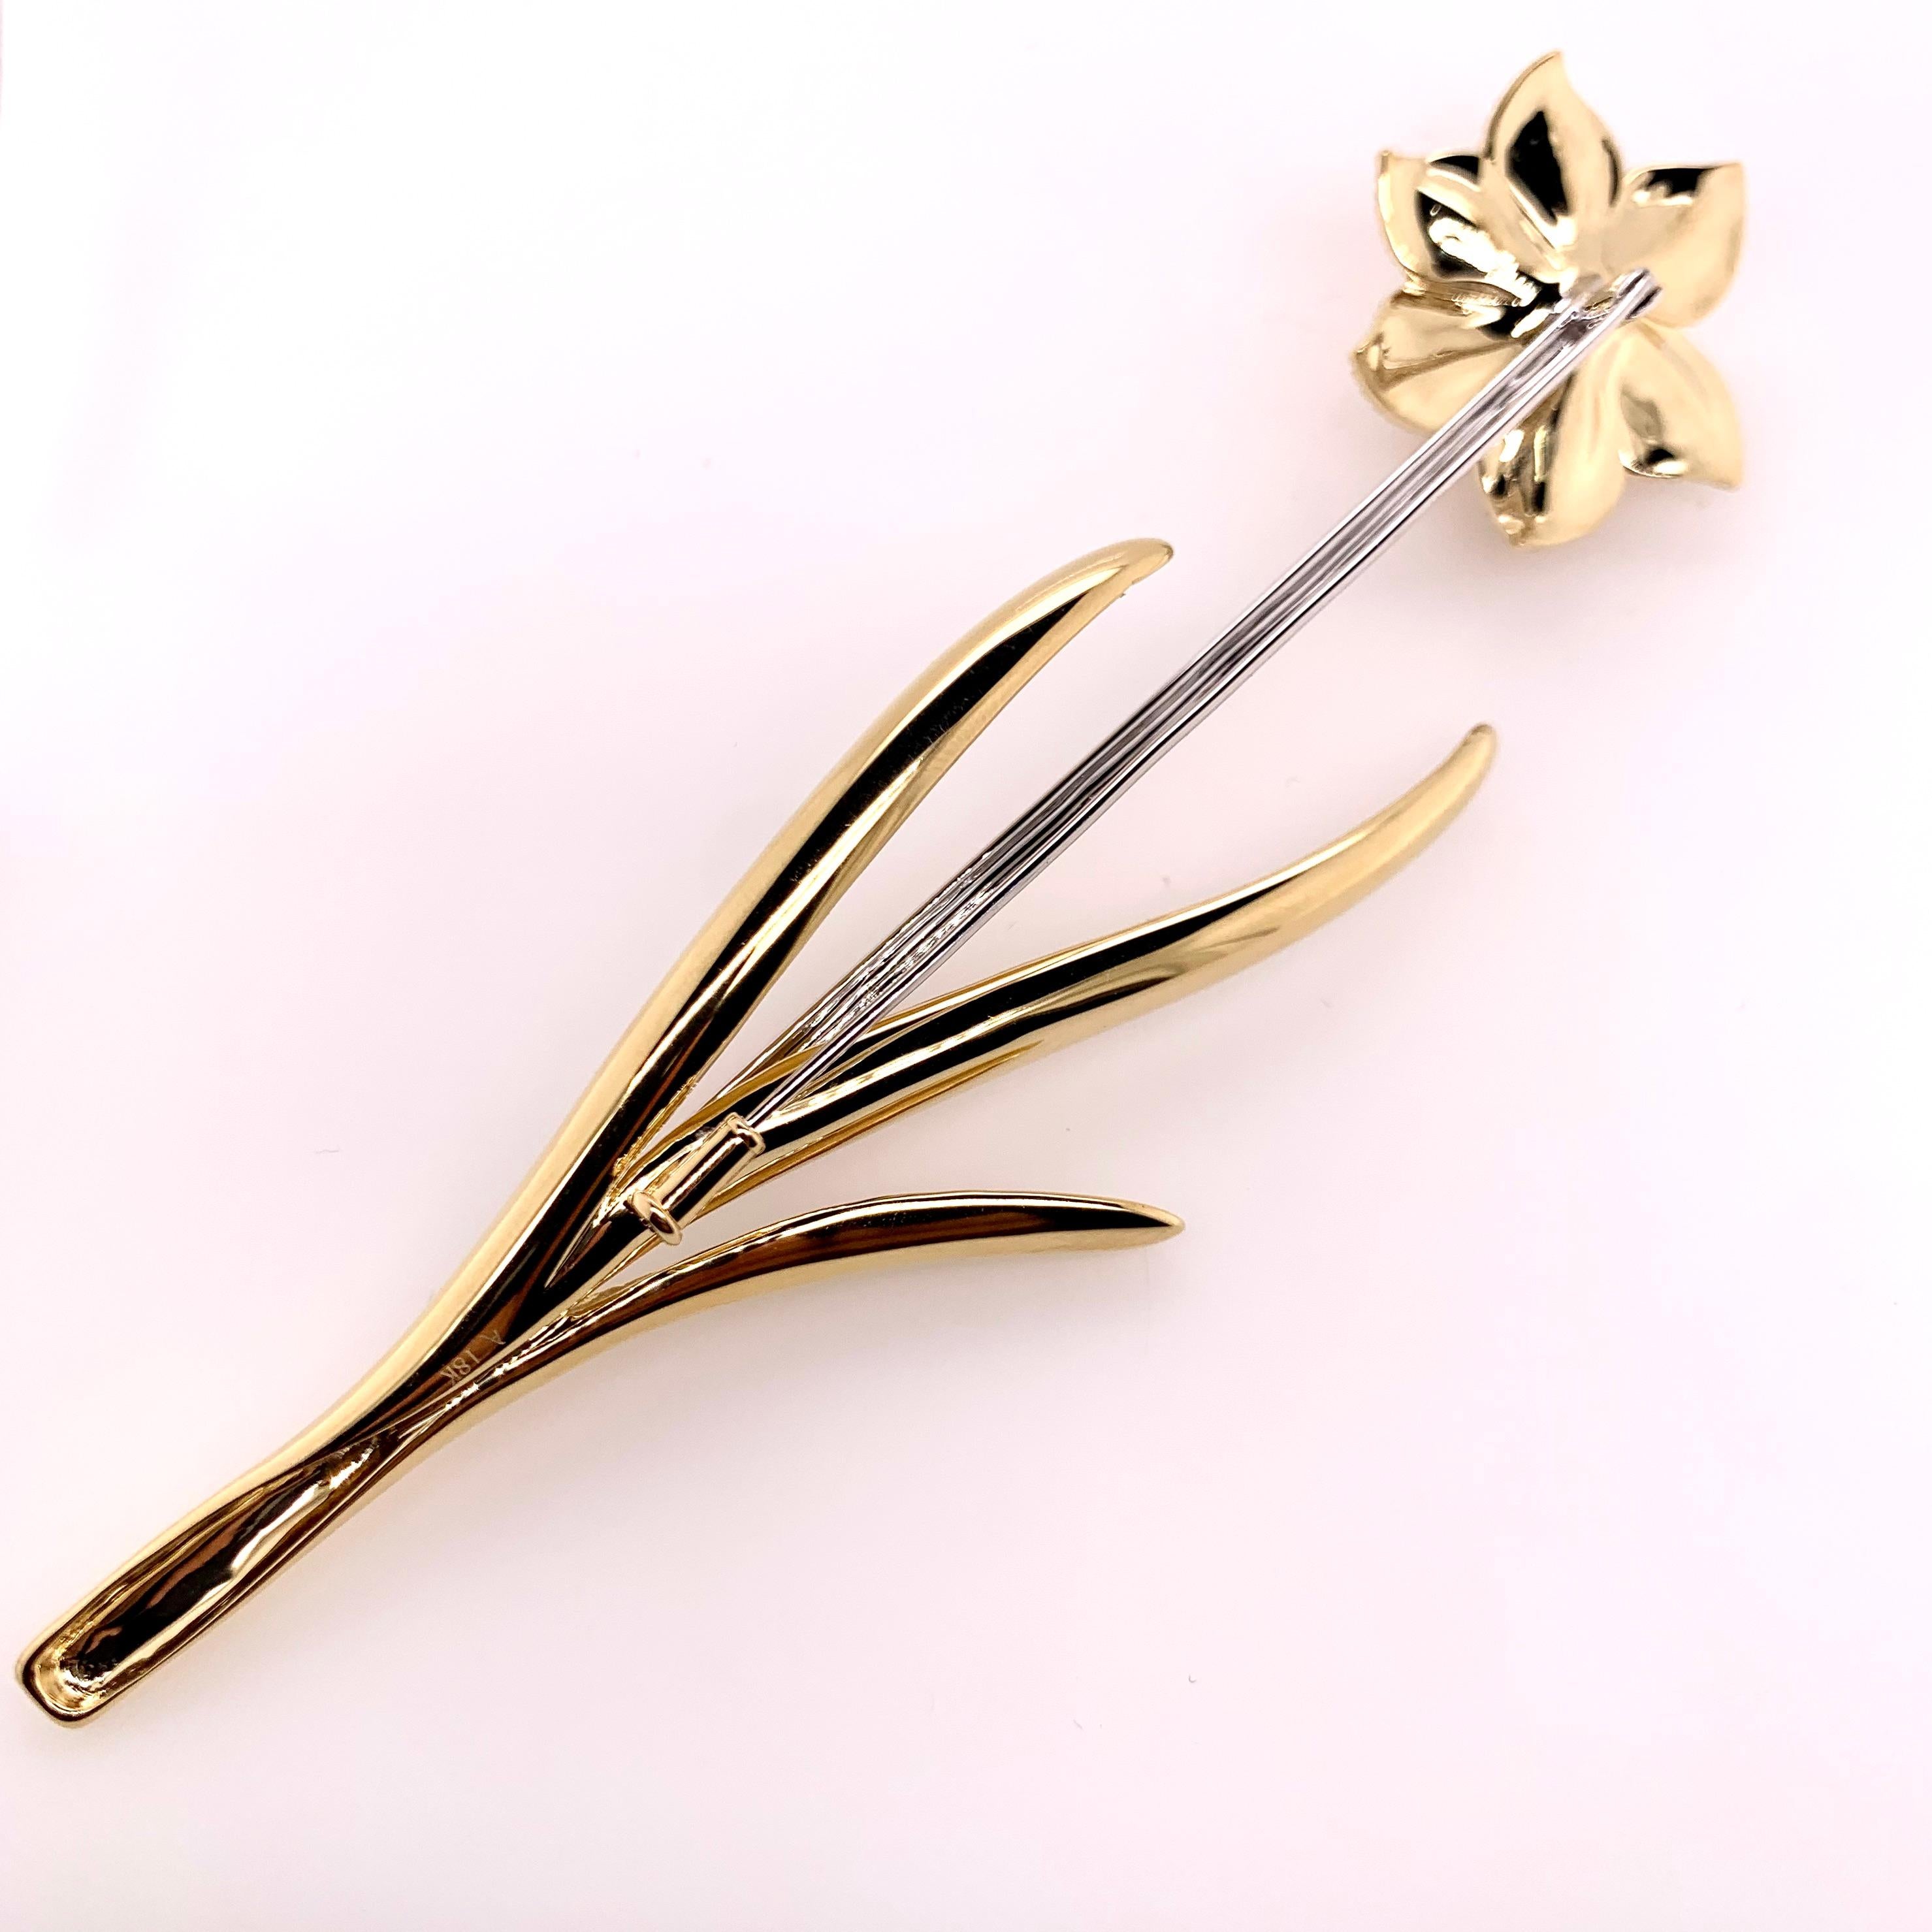 This stunning brooch was handmade and designed for all the avid flower collectors and spectators.   The tricolor 18k gold combination is stunning with the fine details involved making the bulbs and petals.  It is 5 inches in length with a stick pin